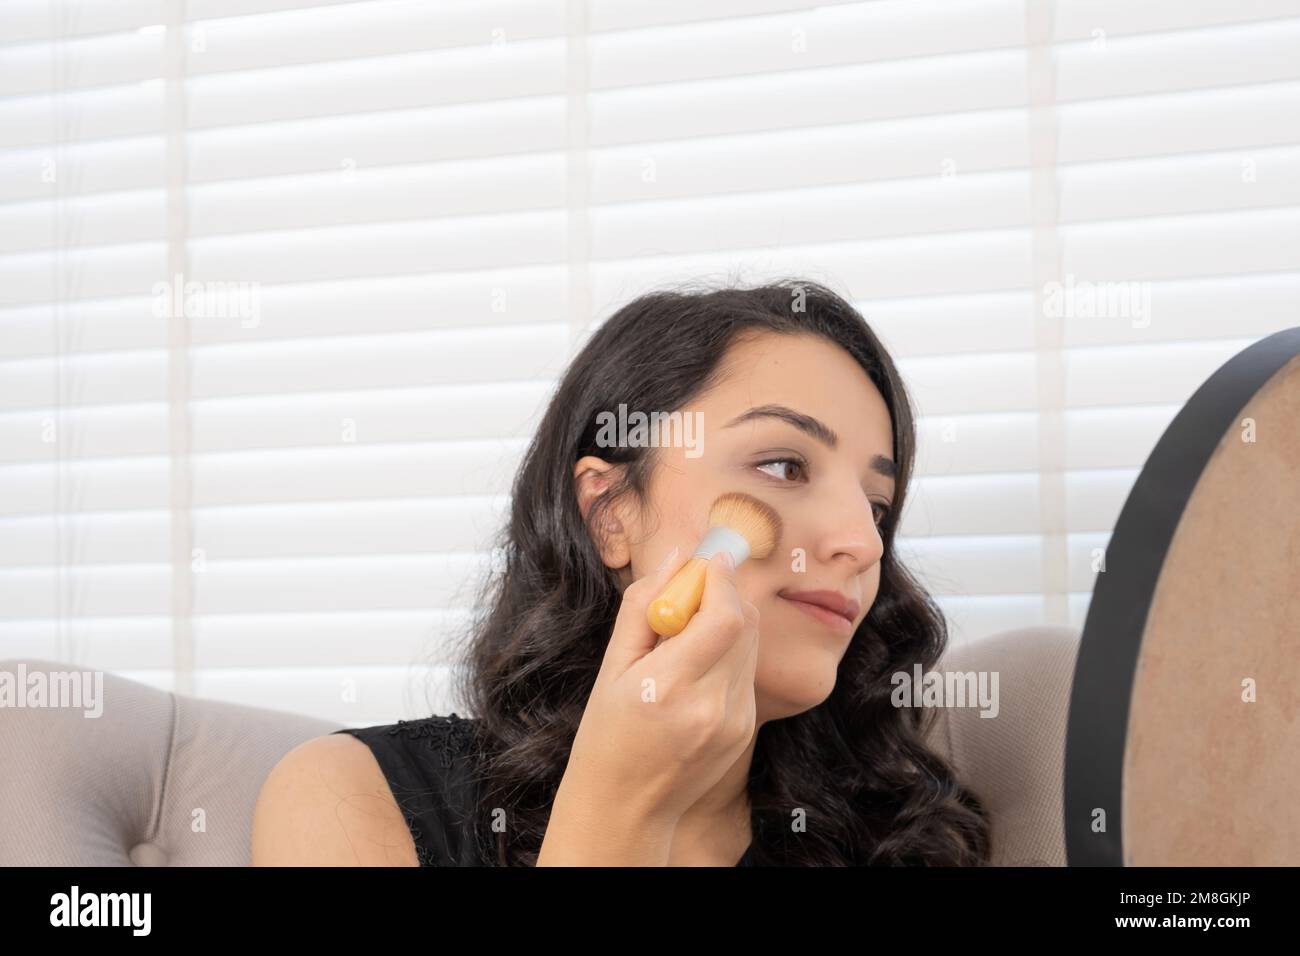 Applying blush, brunette millennial woman. Beige foundation powder on cheeks. Using make up brush. Sitting armchair at home. Putting make up concept. Stock Photo